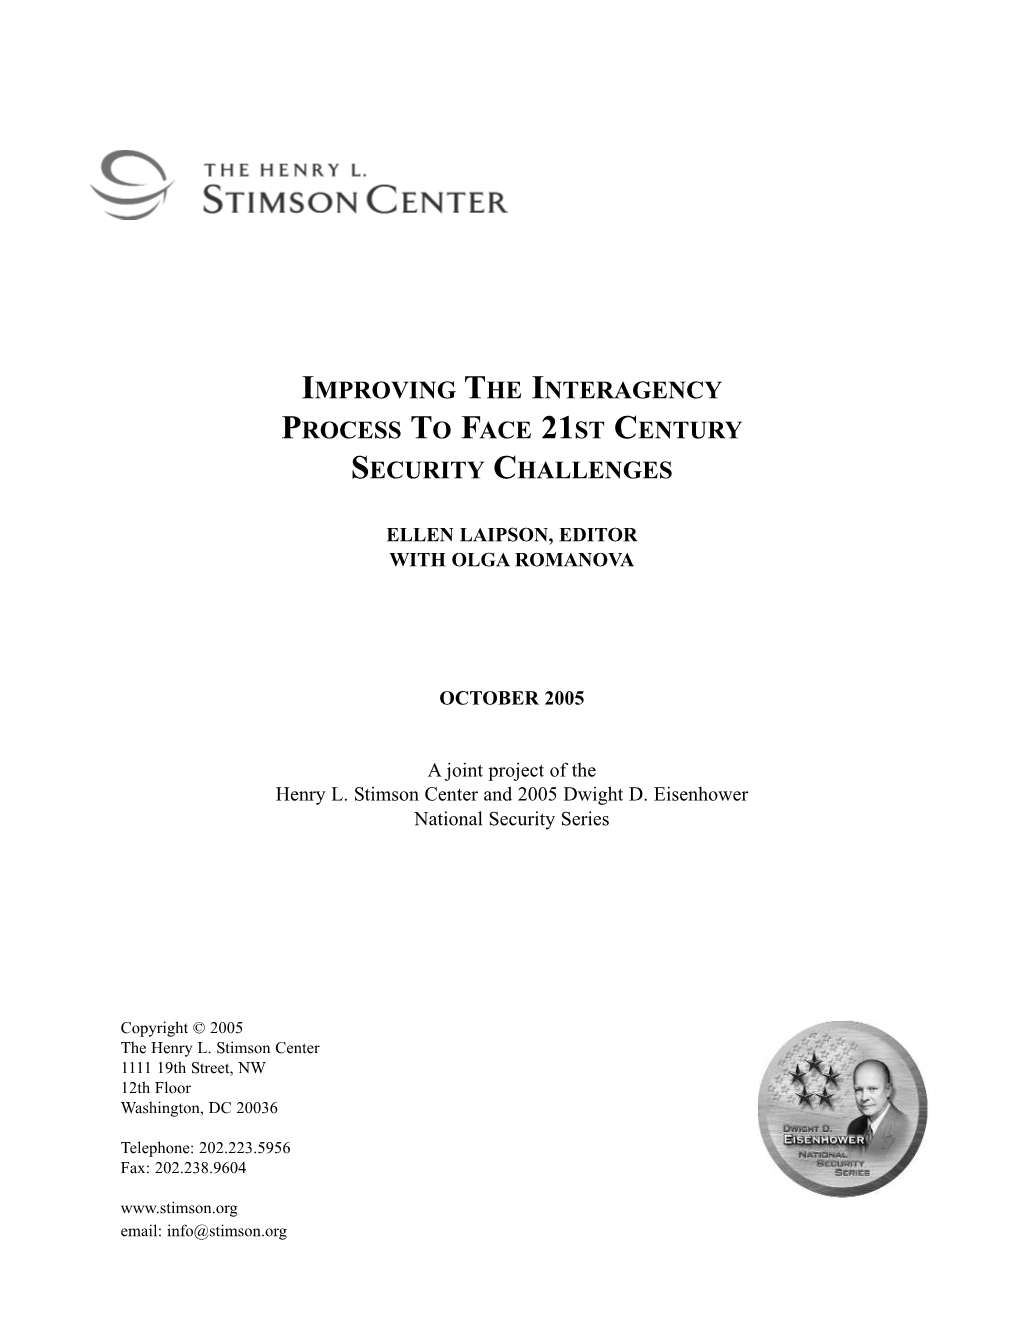 Improving the Interagency Process to Face 21St Century Security Challenges